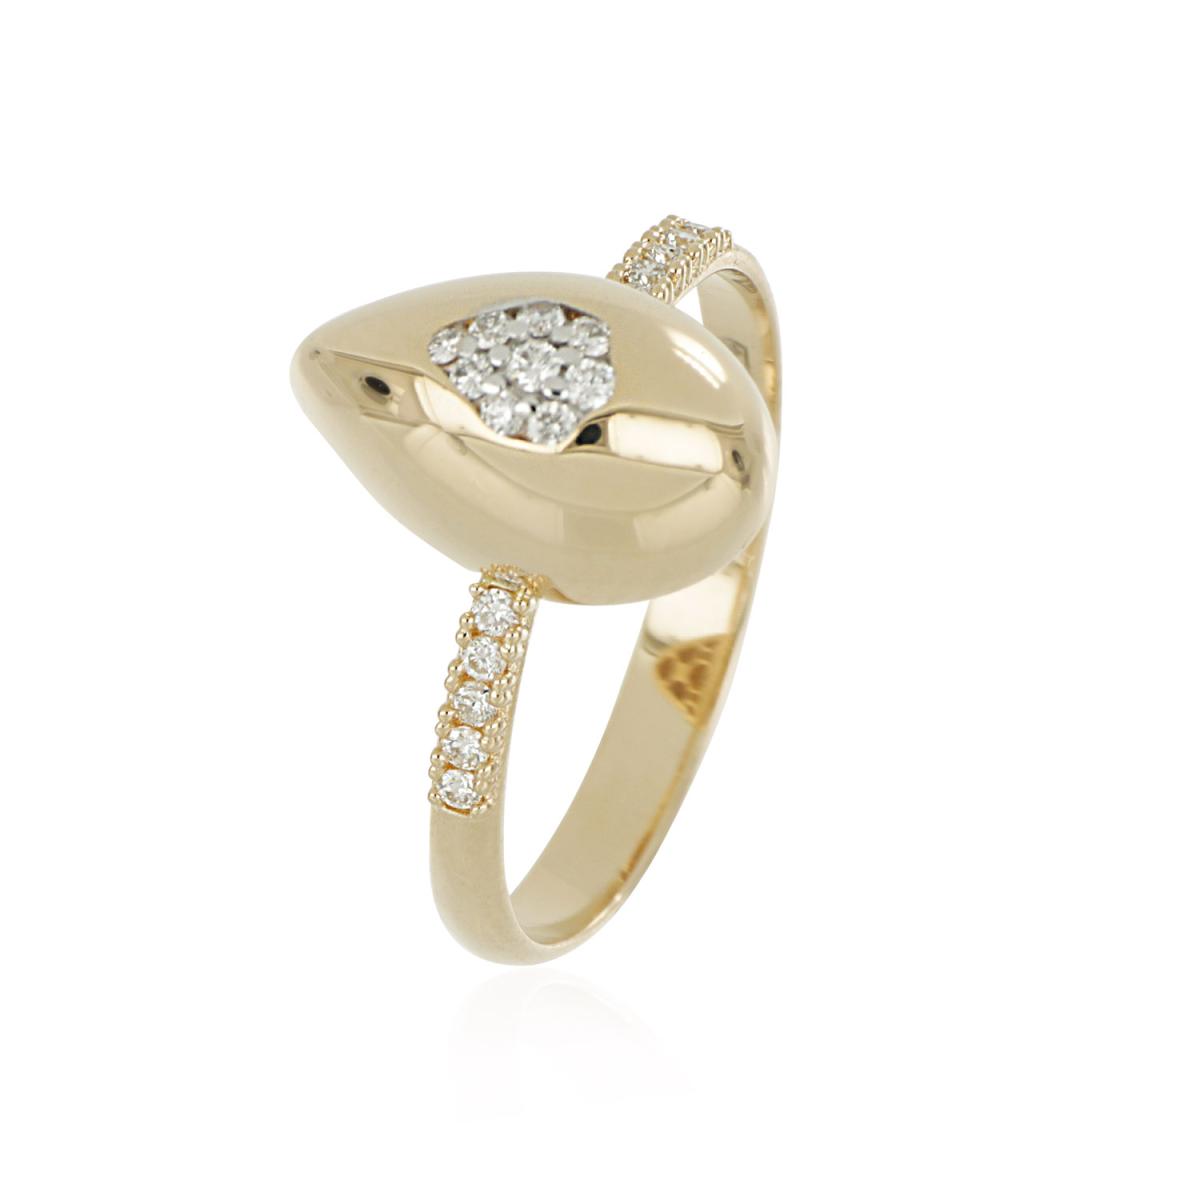 Drop ring in gold and diamonds - AD978